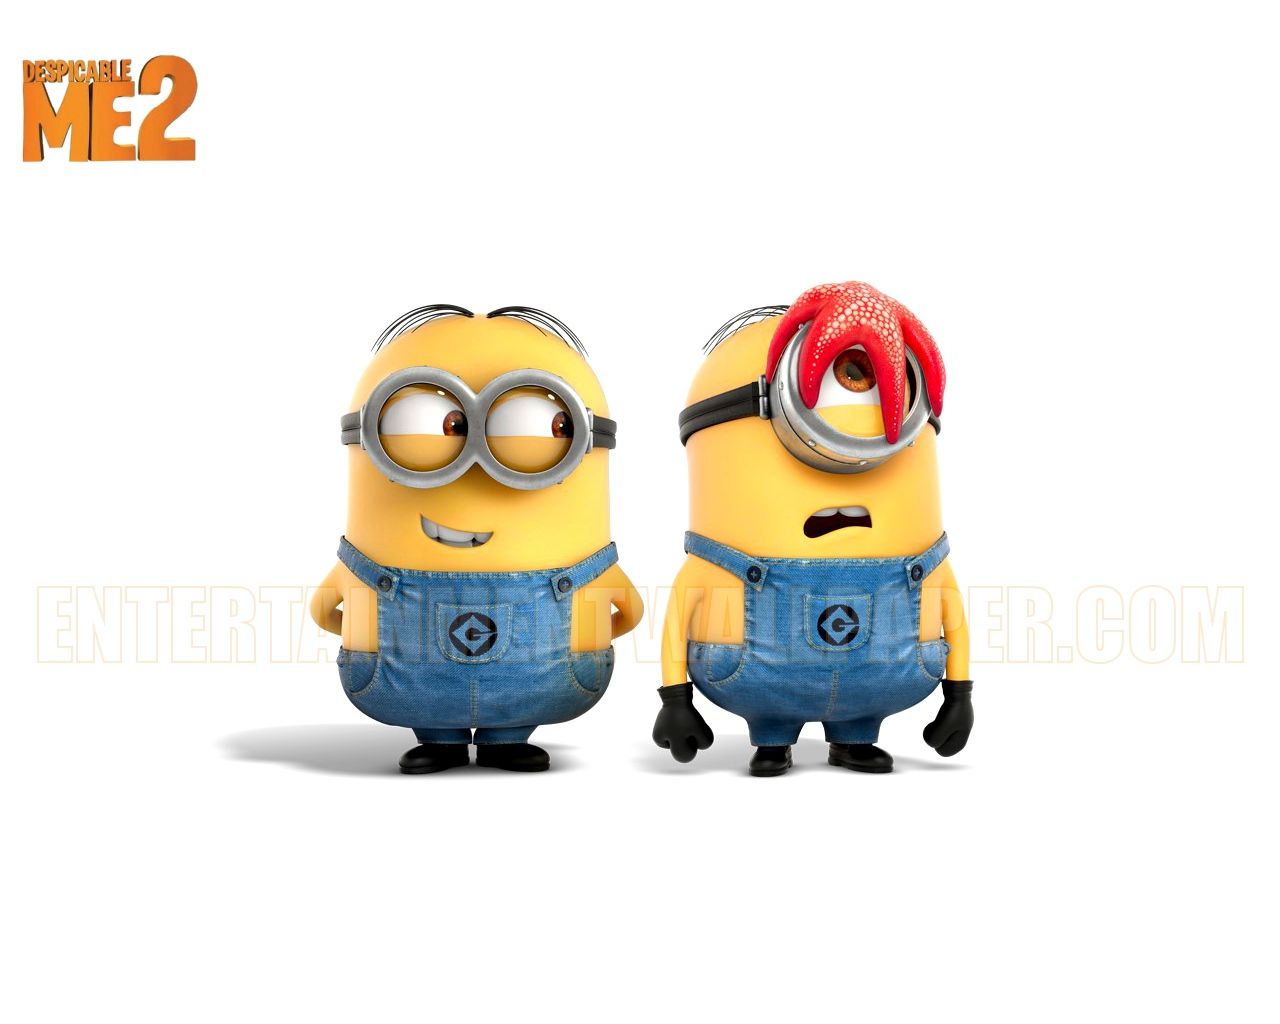 Minions - Despicable Me 2 Top Images Wallpaper 2931 Hd Wallpapers ...